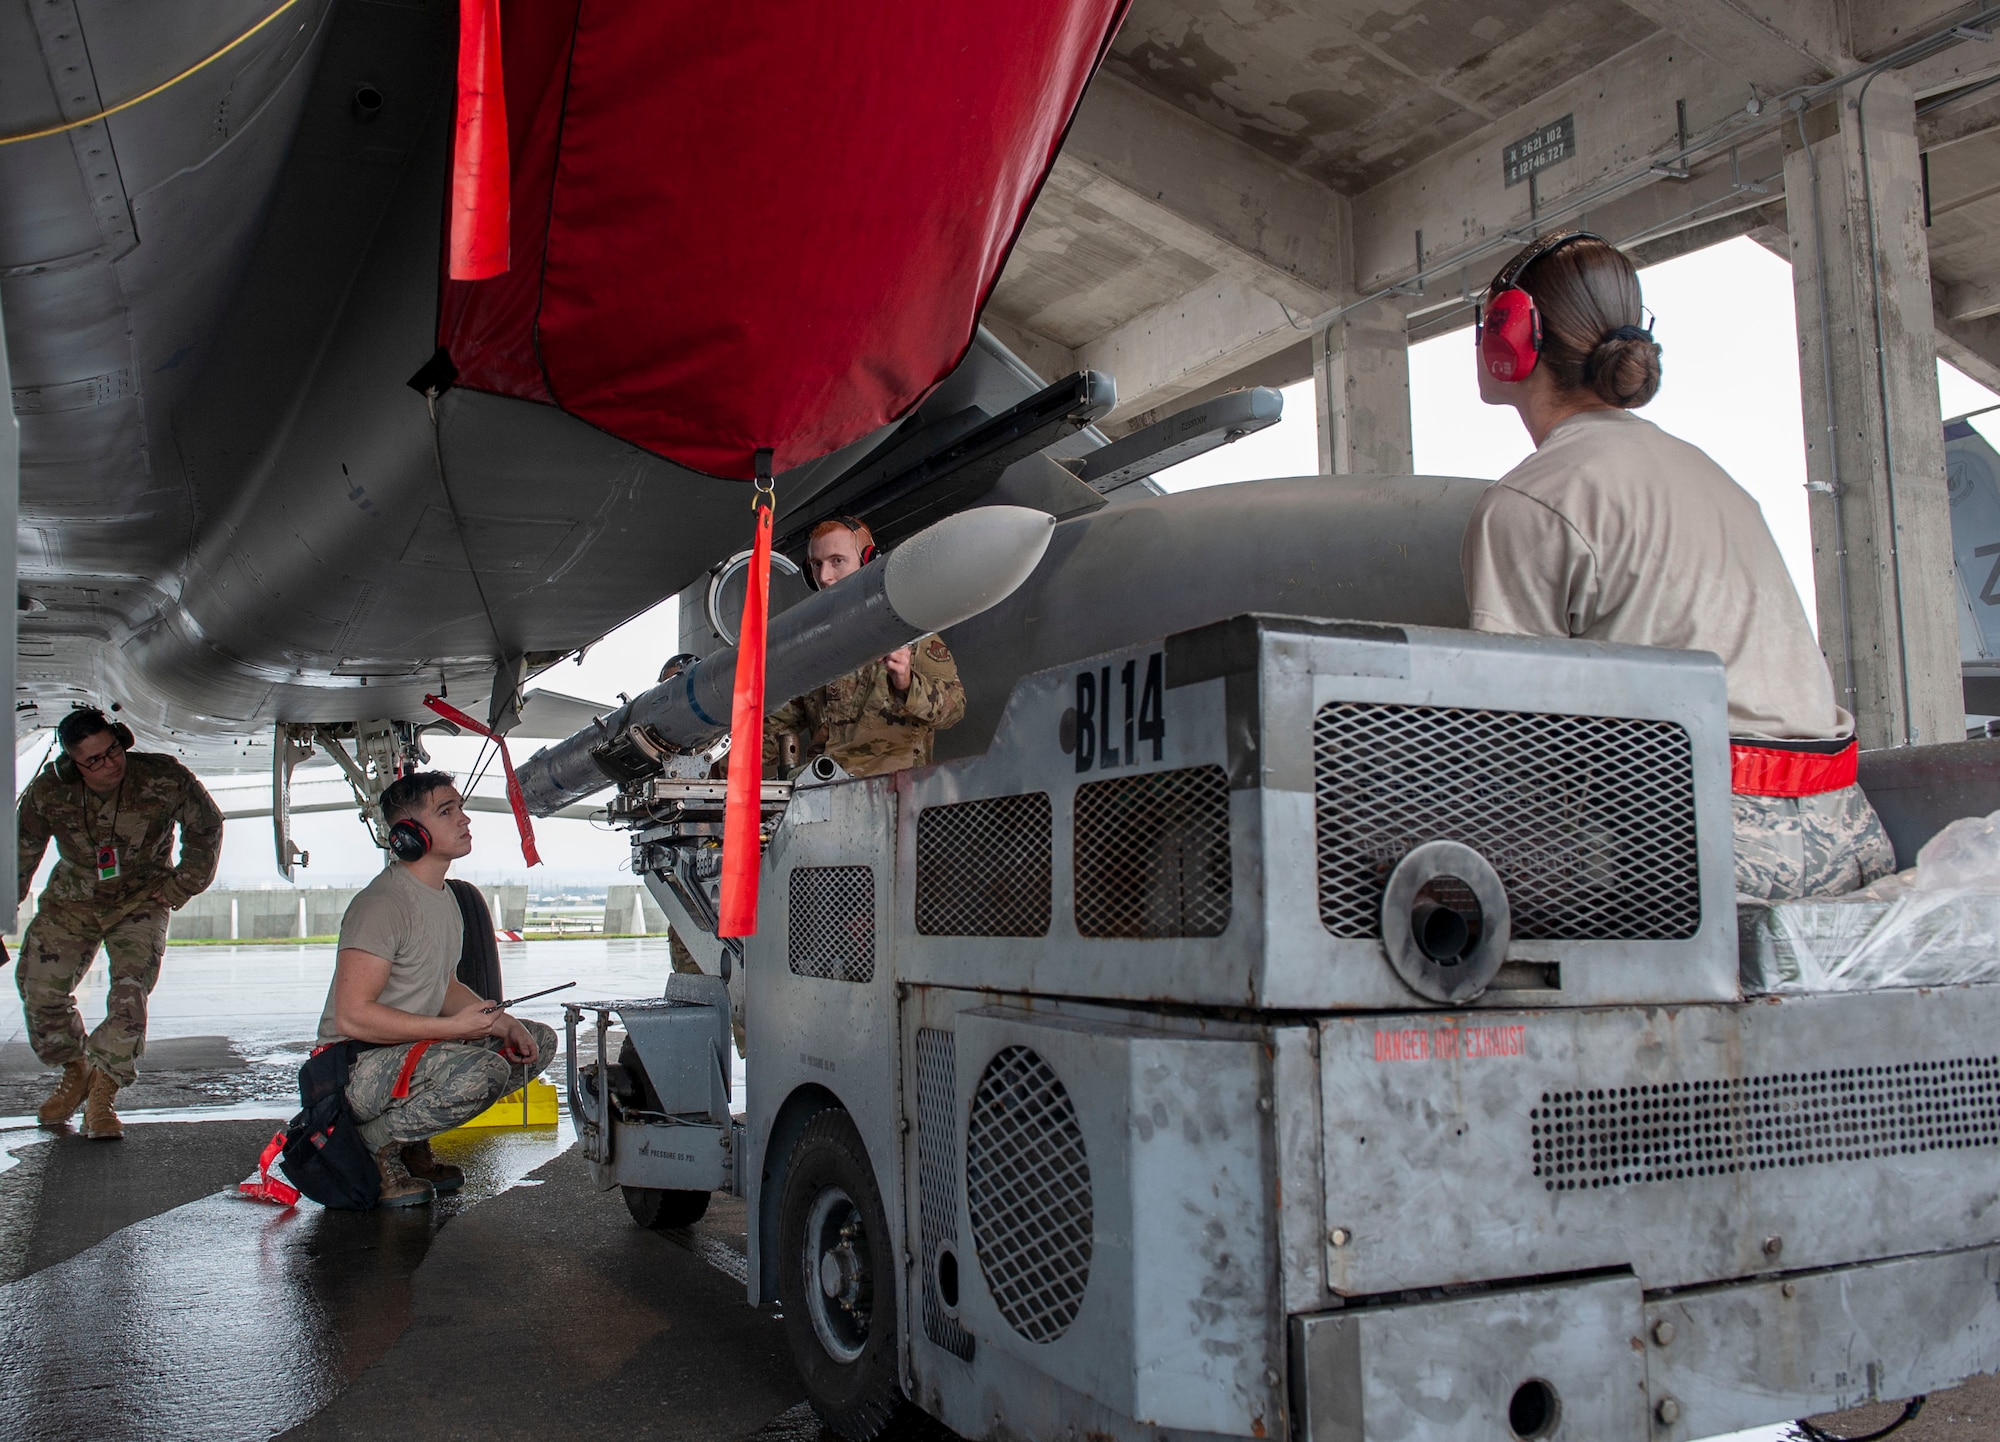 U.S. Air Force load crew members from the 67th Aircraft Maintenance Unit work together during the annual weapons load competition at Kadena Air Base, Japan, Jan. 17, 2020. During the competition, the 67th and 44th AMUs competed to see who is the best 2019 weapons load crew team within the 18th Aircraft Maintenance Squadron. (U.S. Air Force photo by Naoto Anazawa)